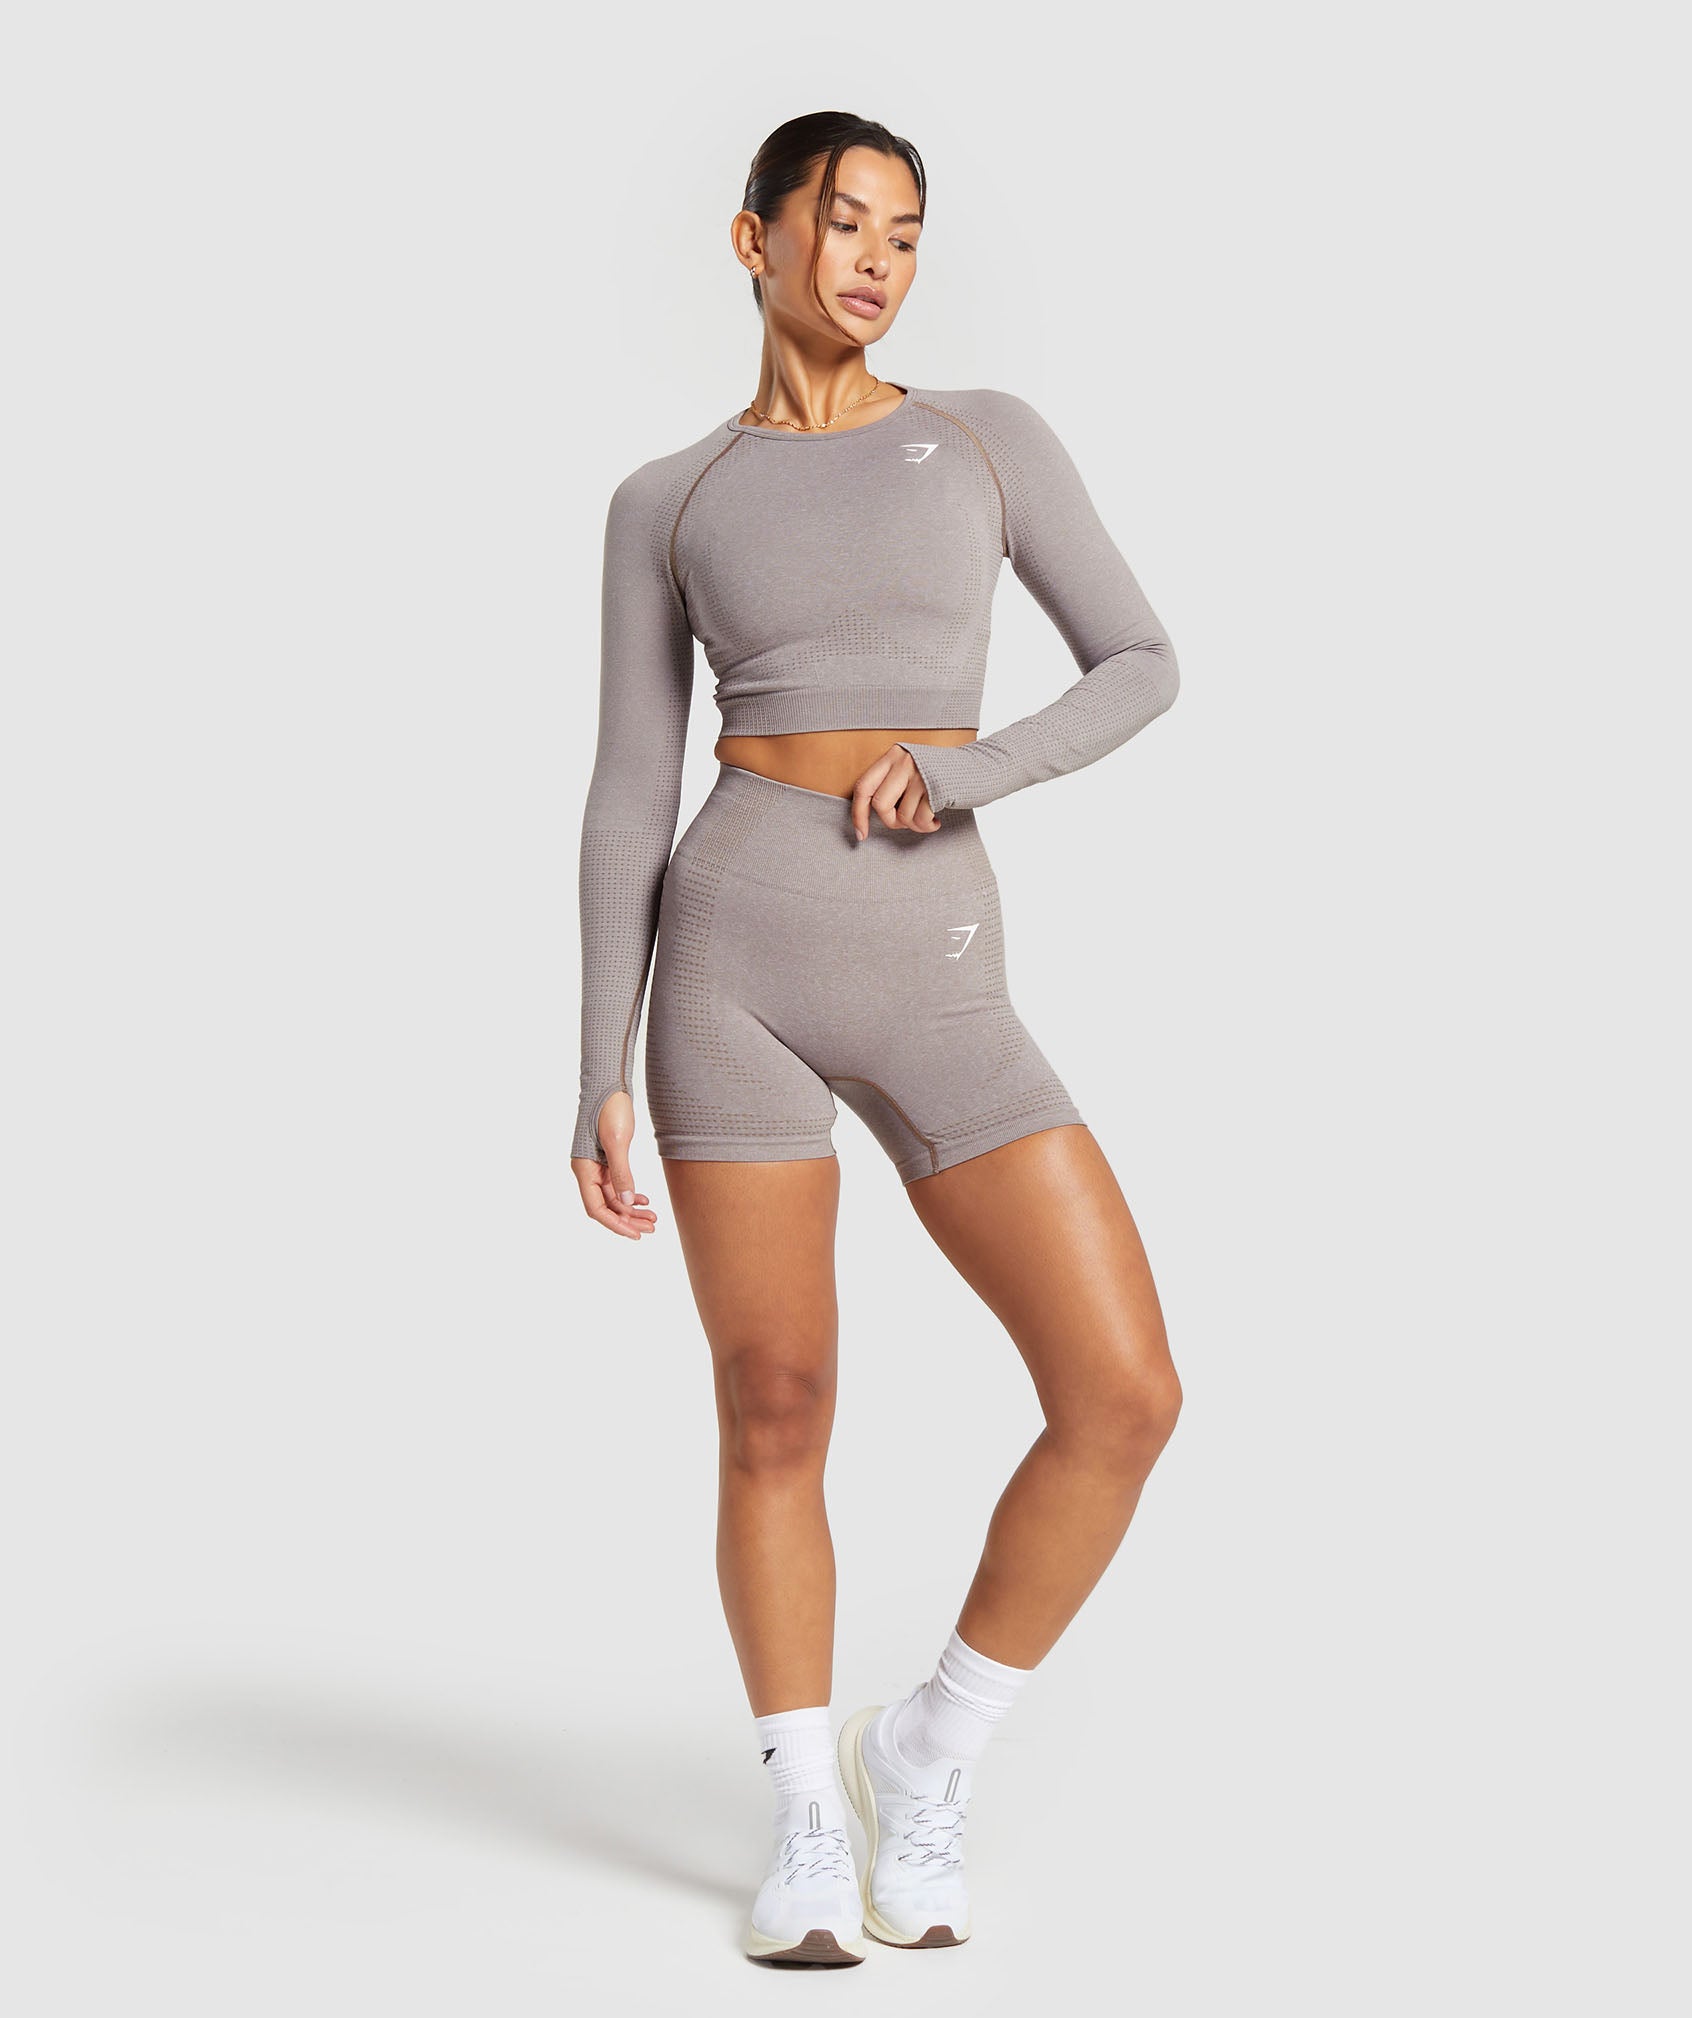 Vital Seamless 2.0 Crop Top in Warm Taupe Marl - view 4